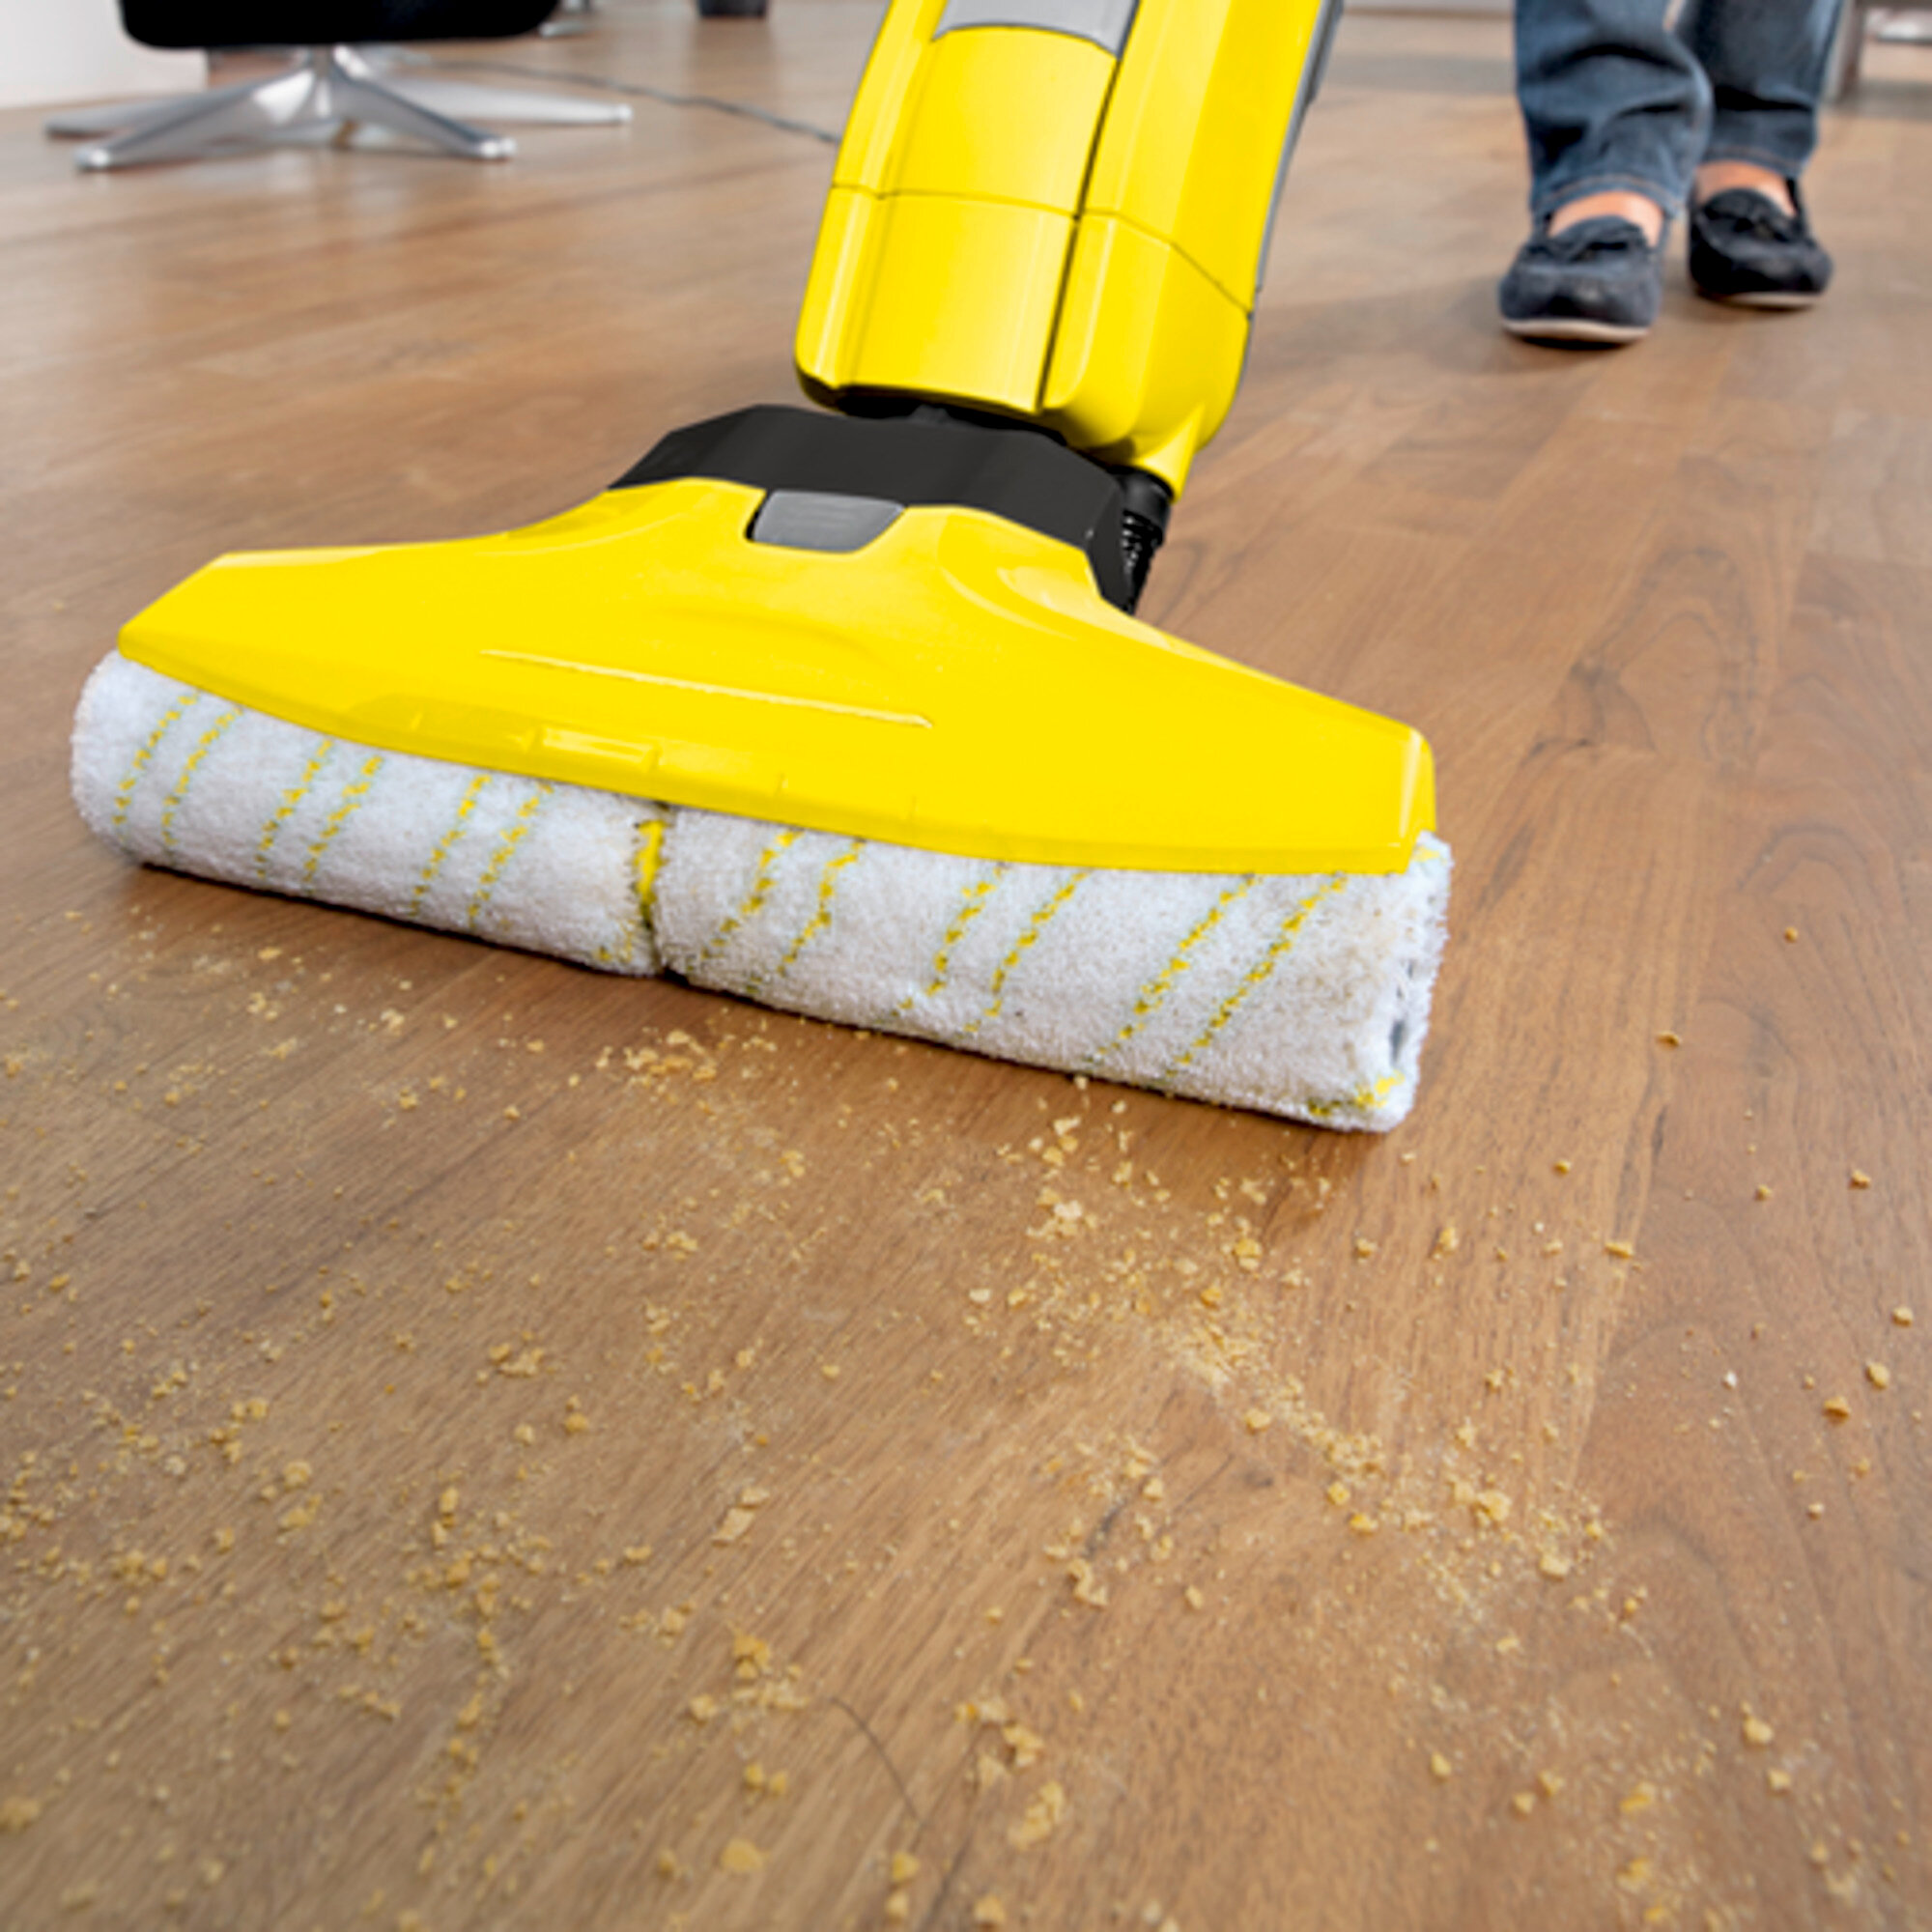 Hard floor cleaner FC 5: Removes dust and spillages.